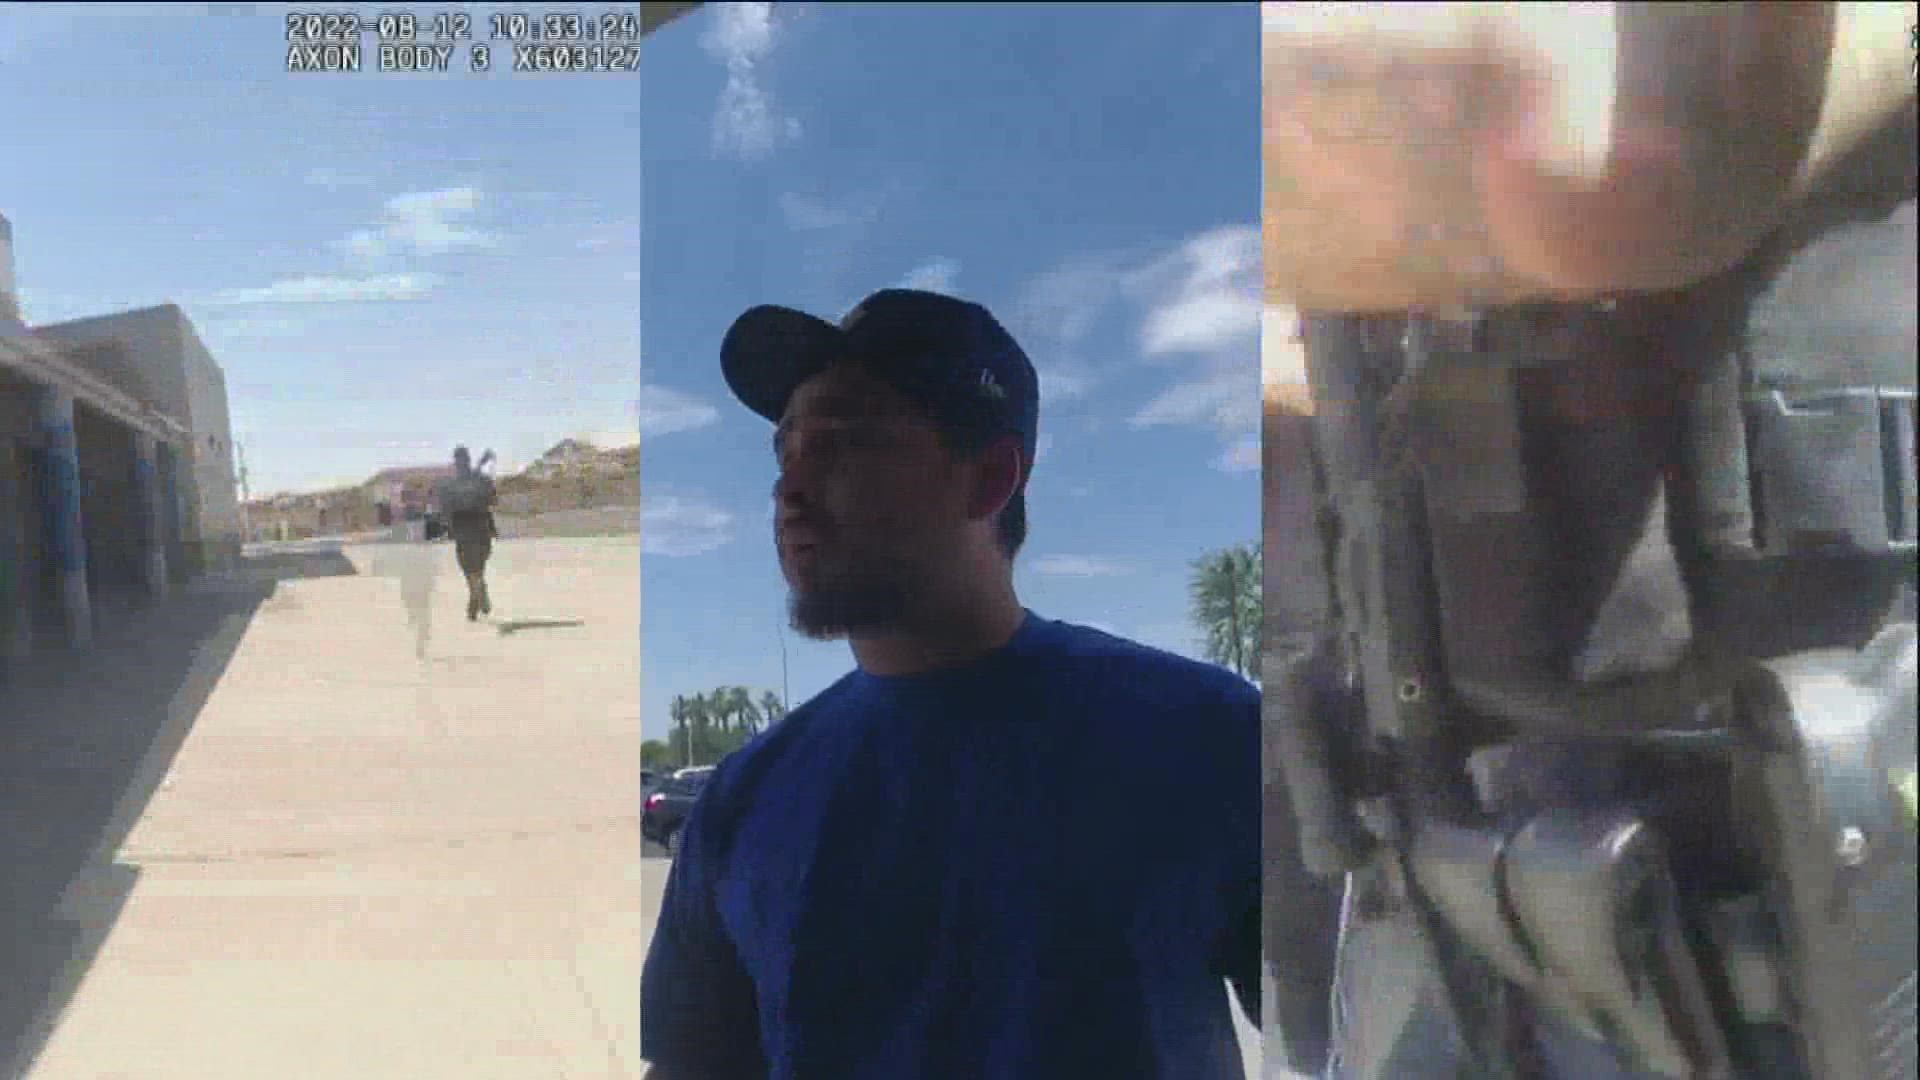 Body-worn camera footage shows the moments during a lockdown at Thompson Ranch Elementary School last week when three people were detained.